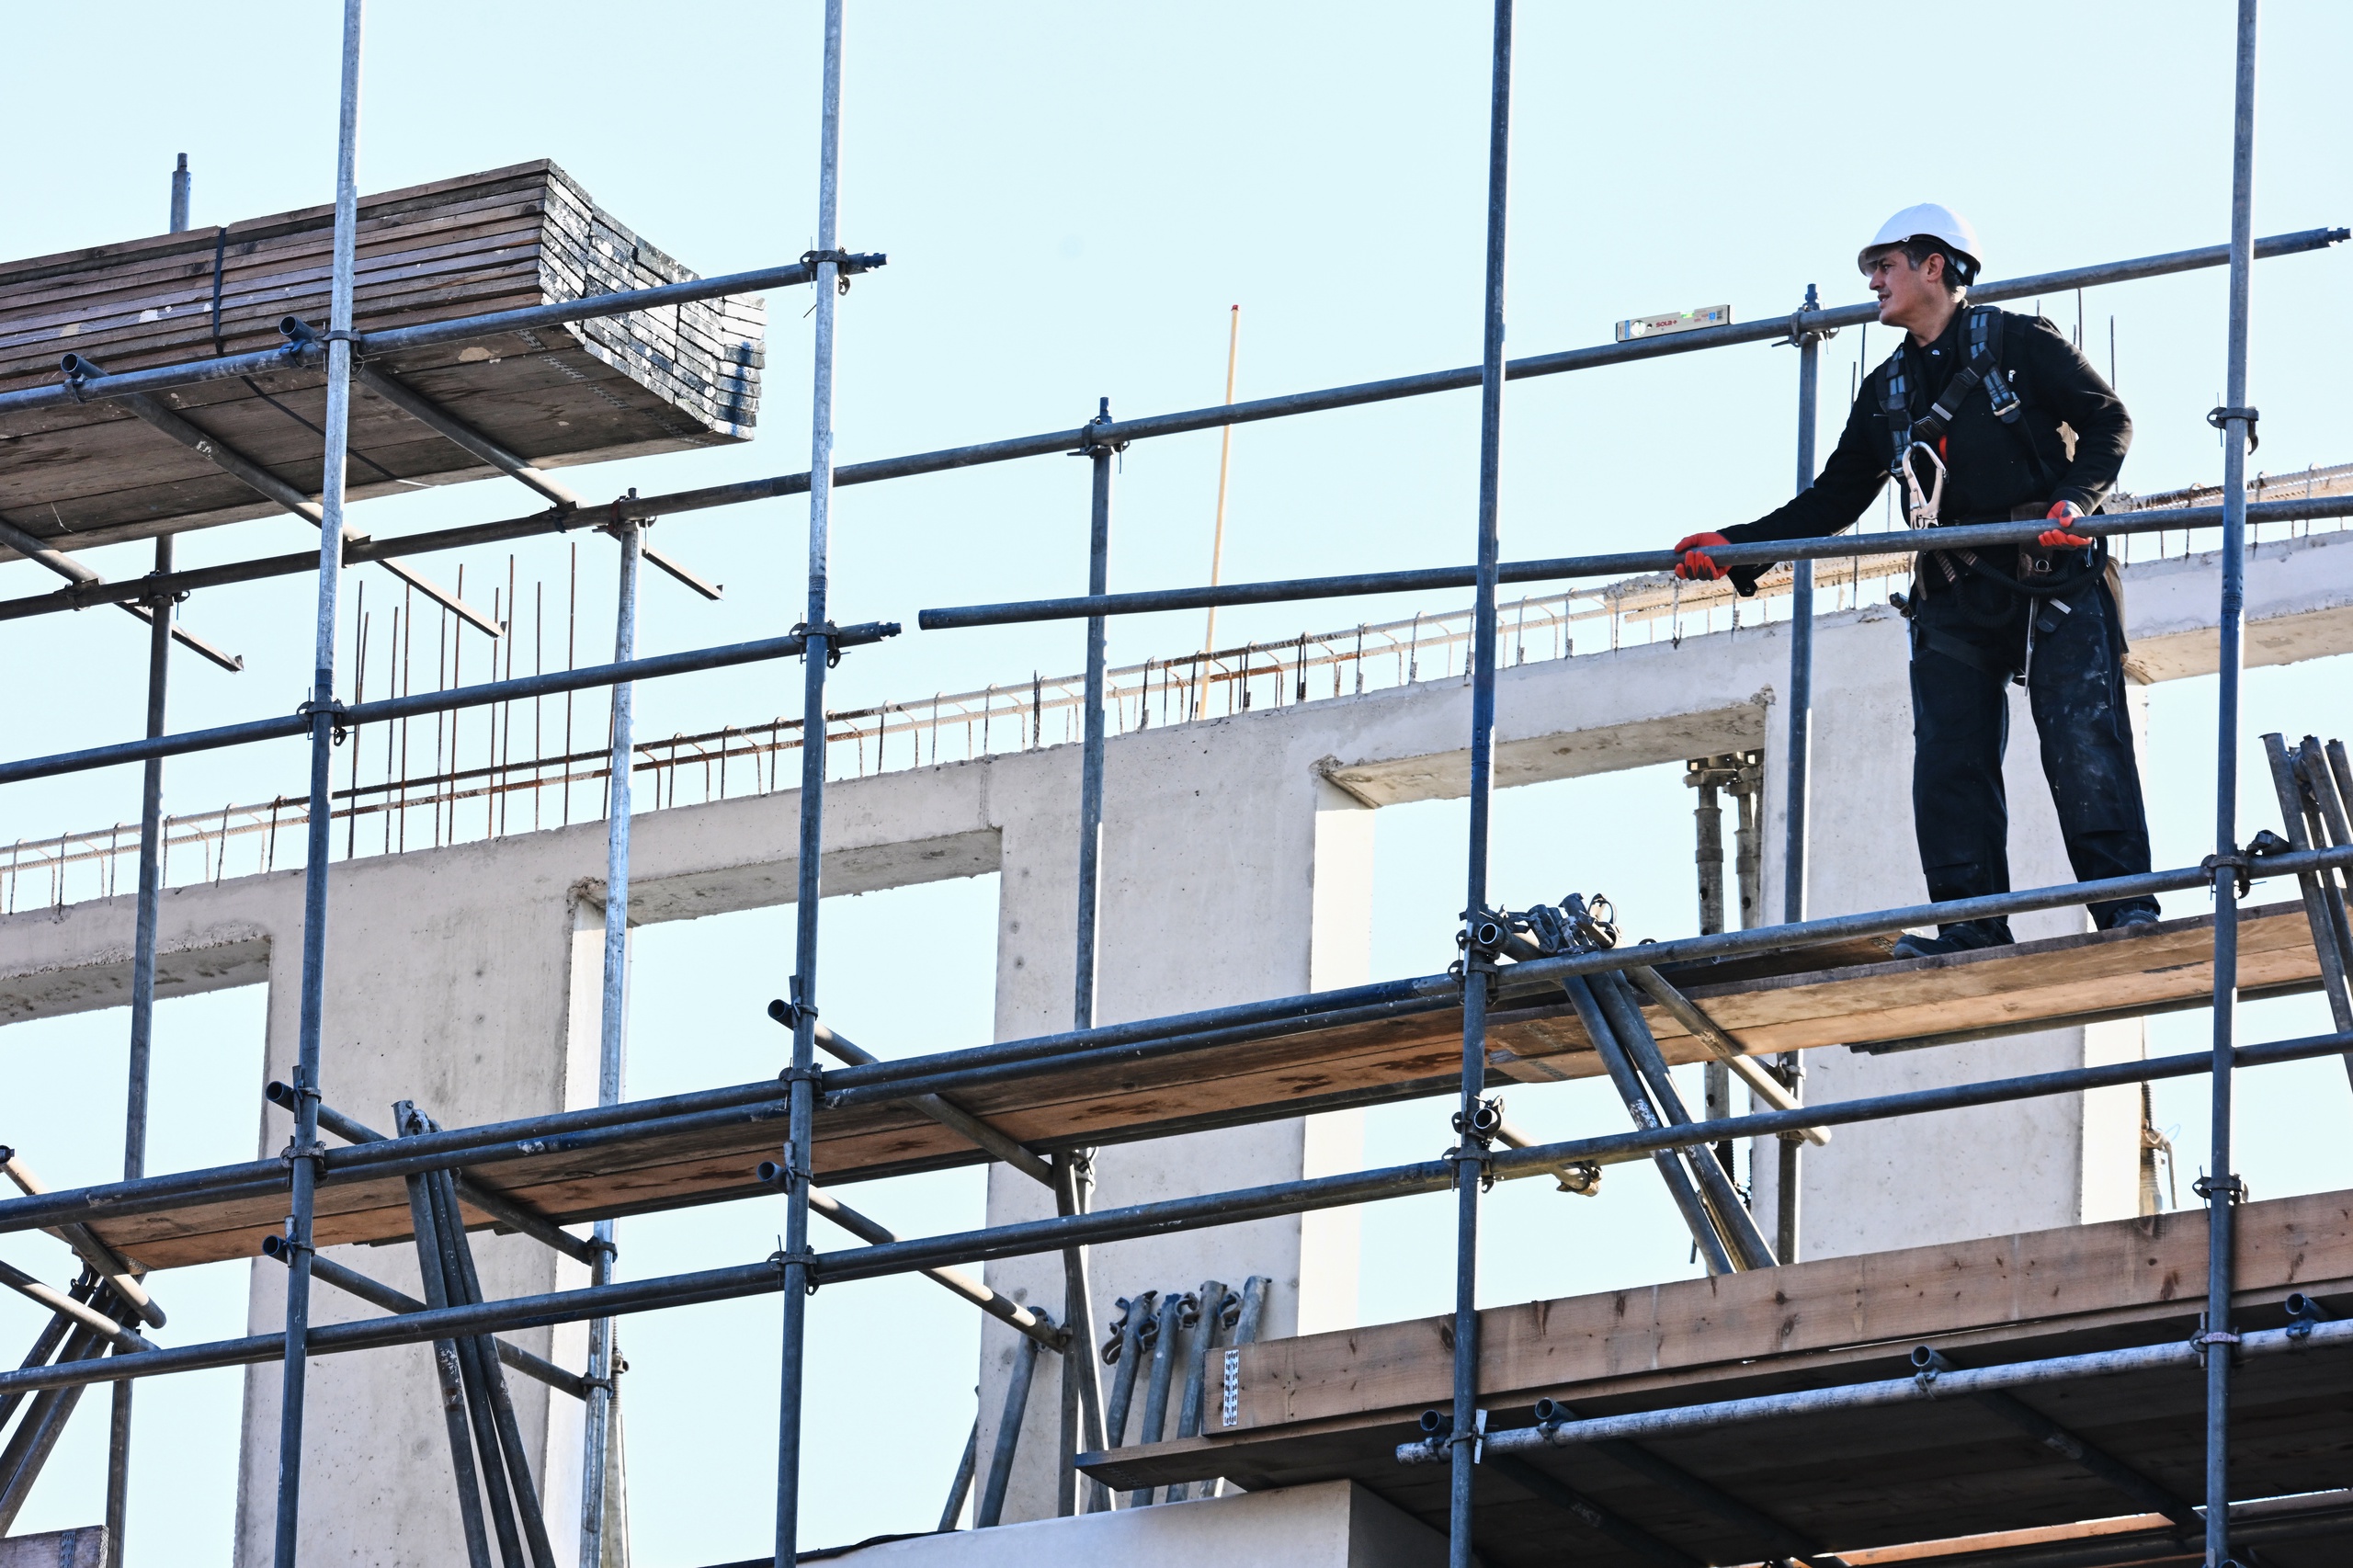 Concerns about permits overshadow turnover increase in construction sector